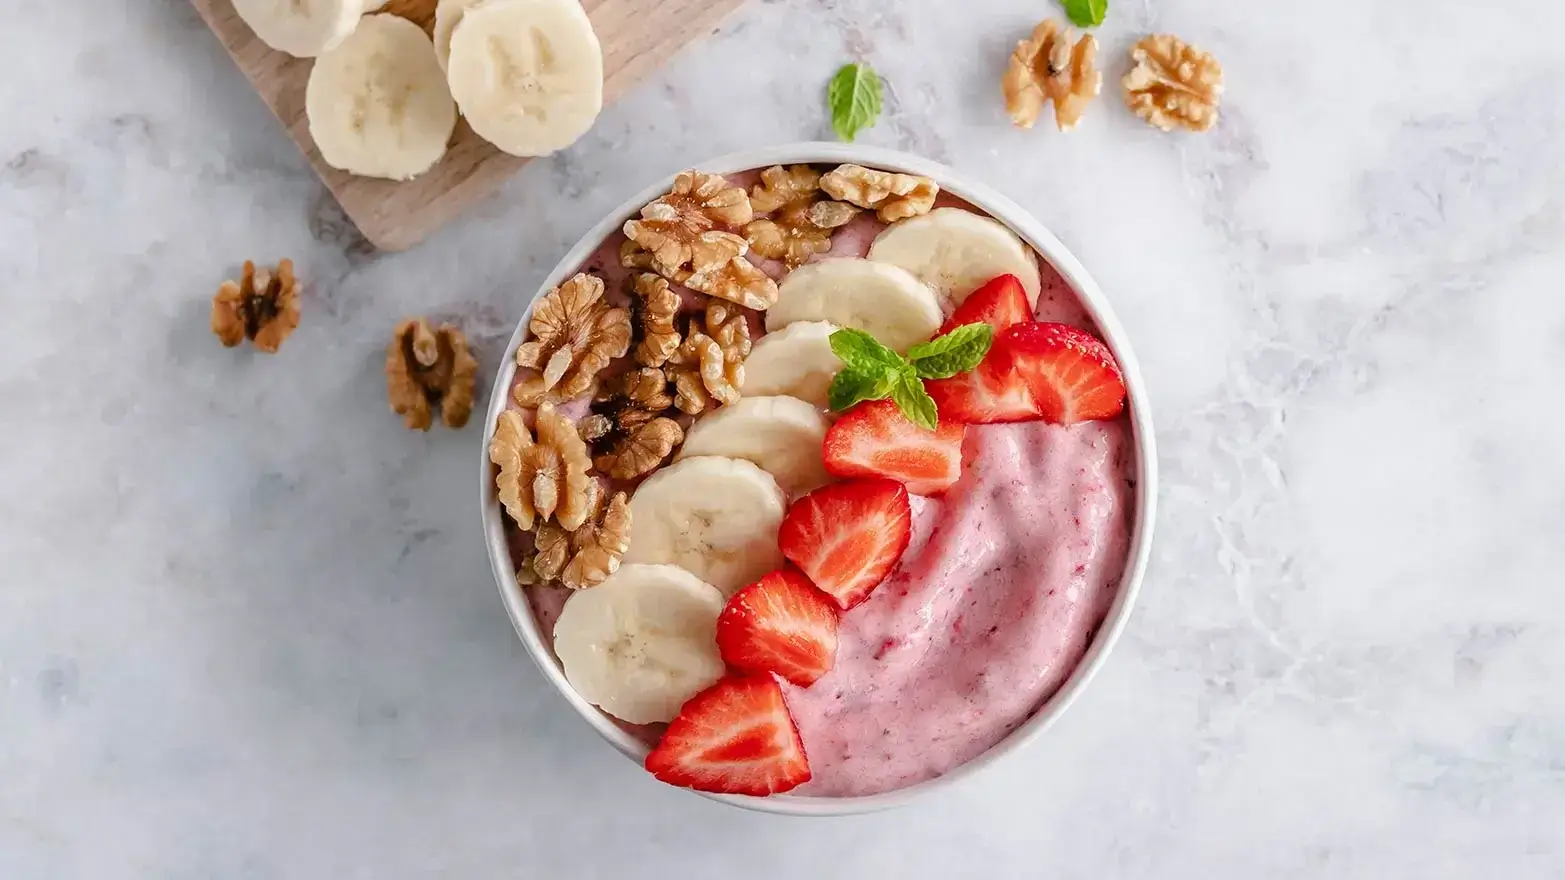 strawberry and banana puree with fruit and granola